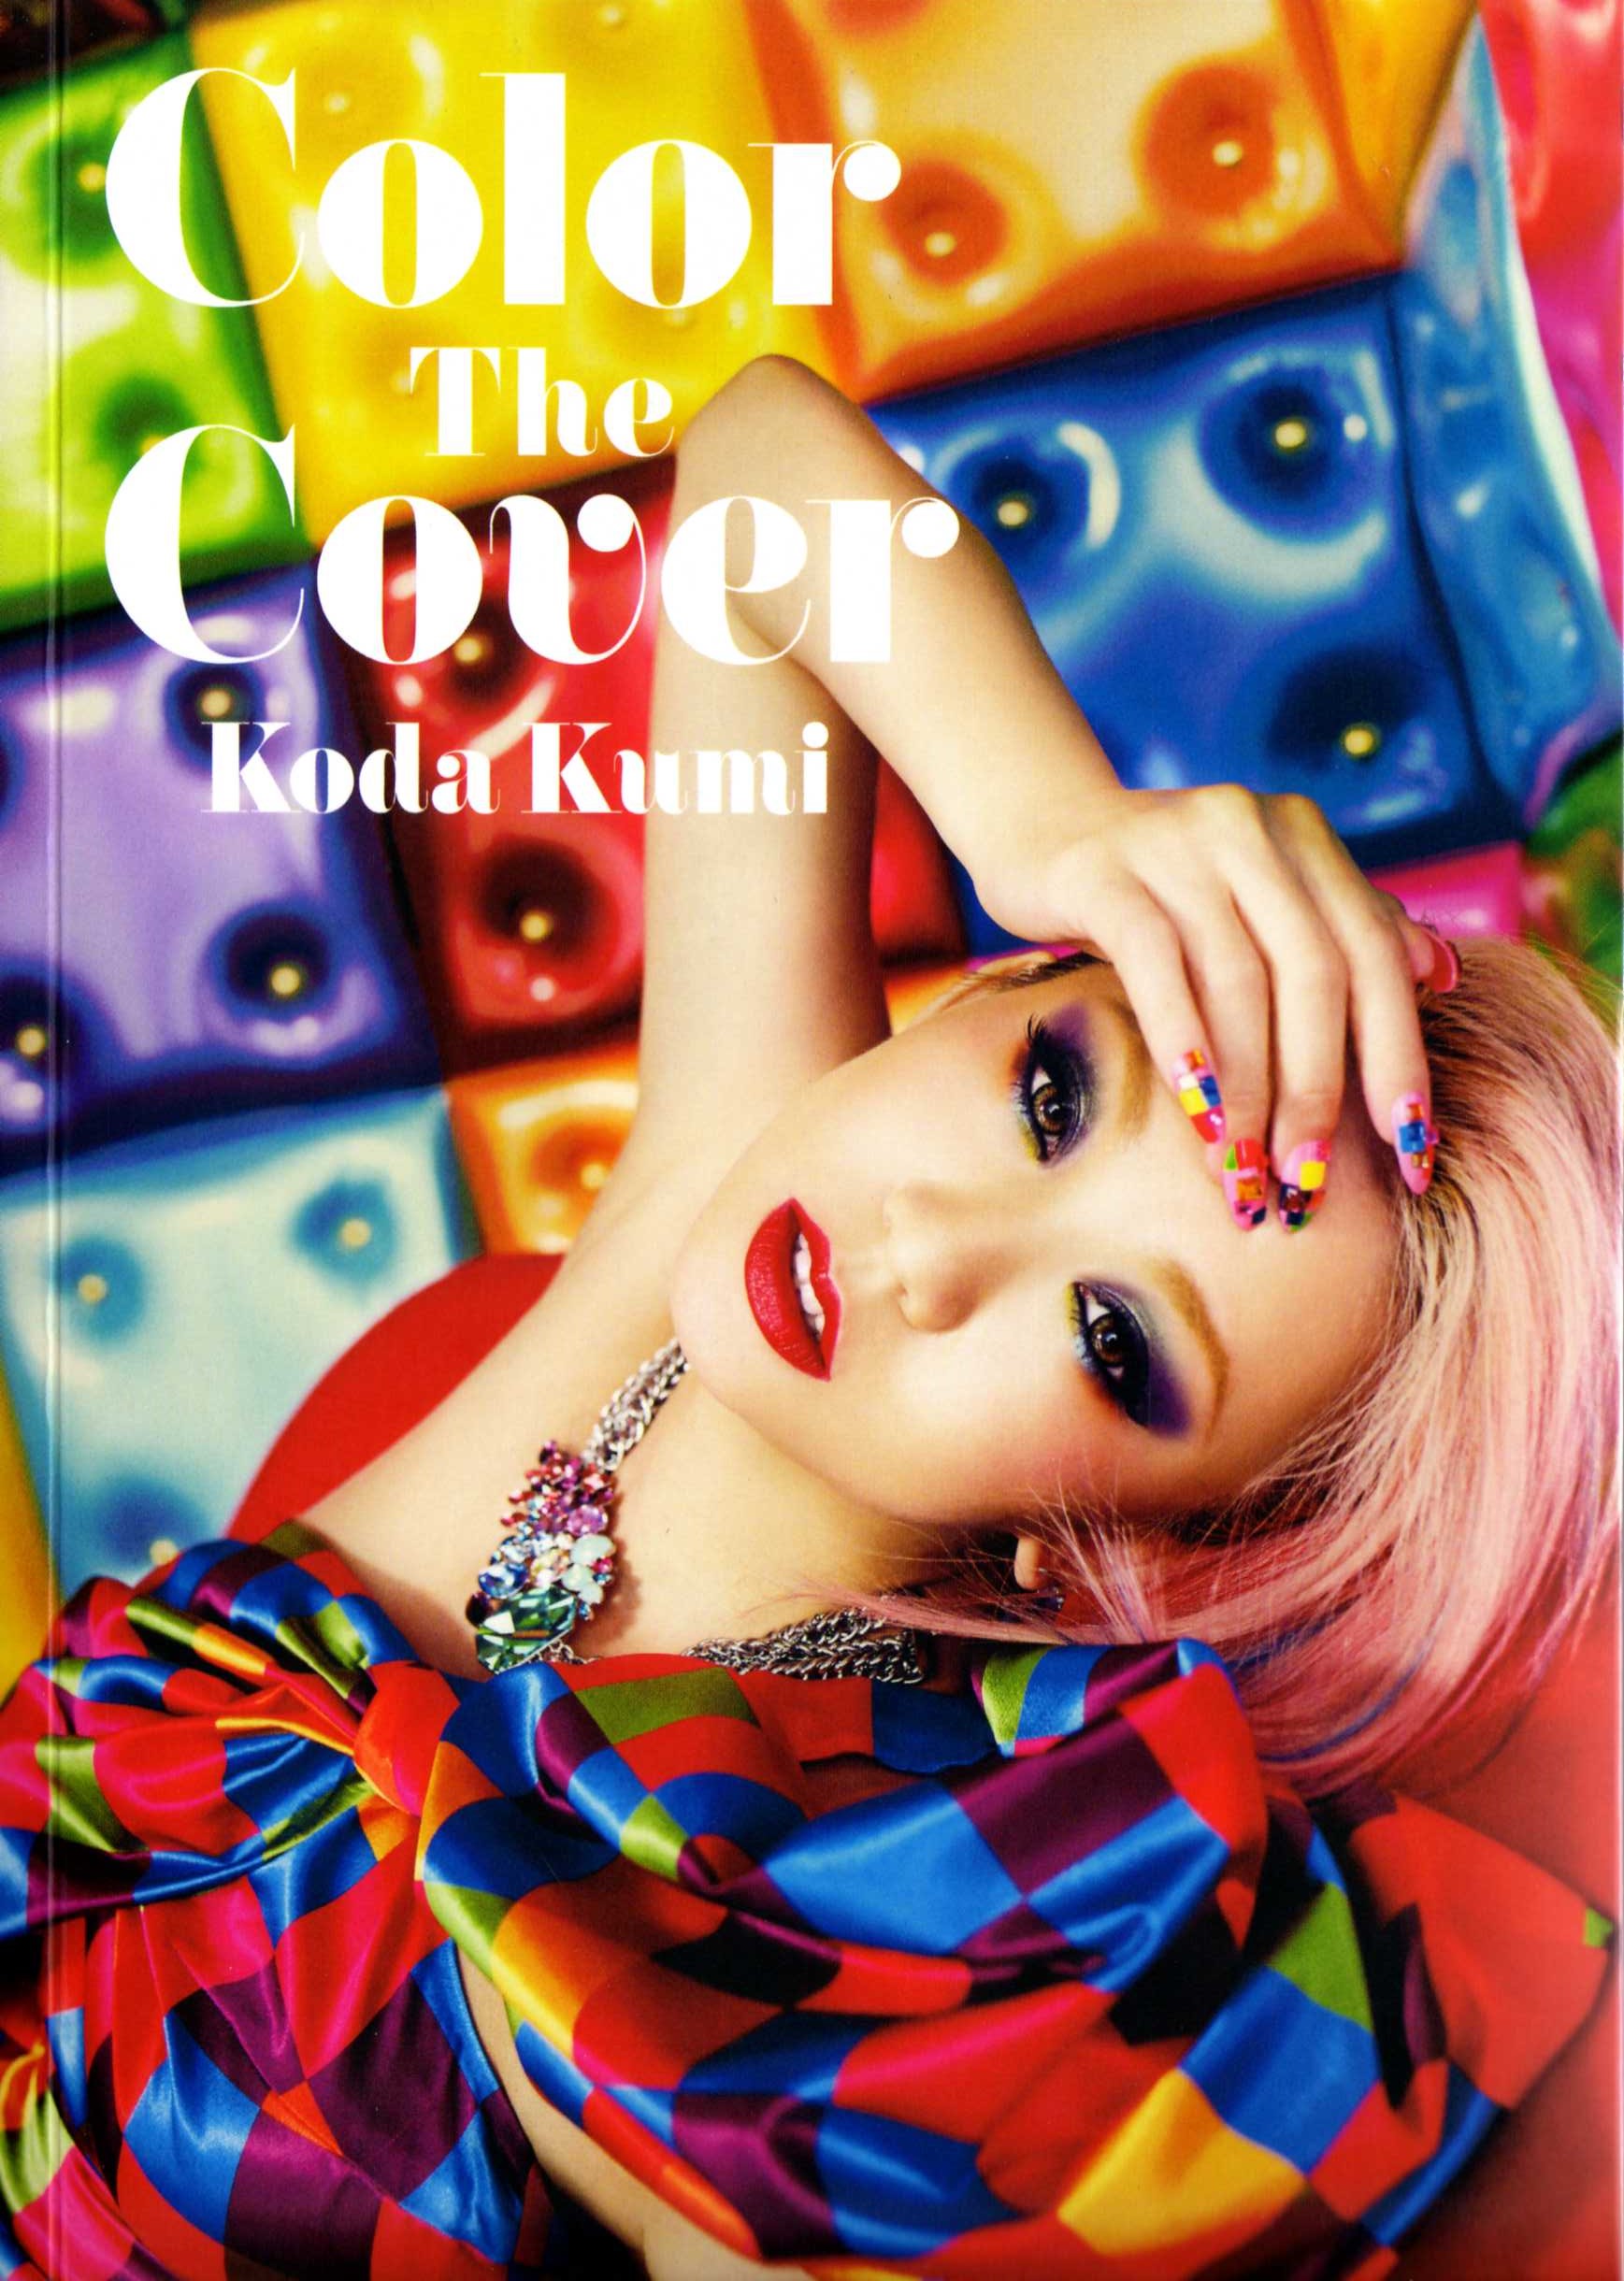 Color The Cover (CD+DVD+BOOK)